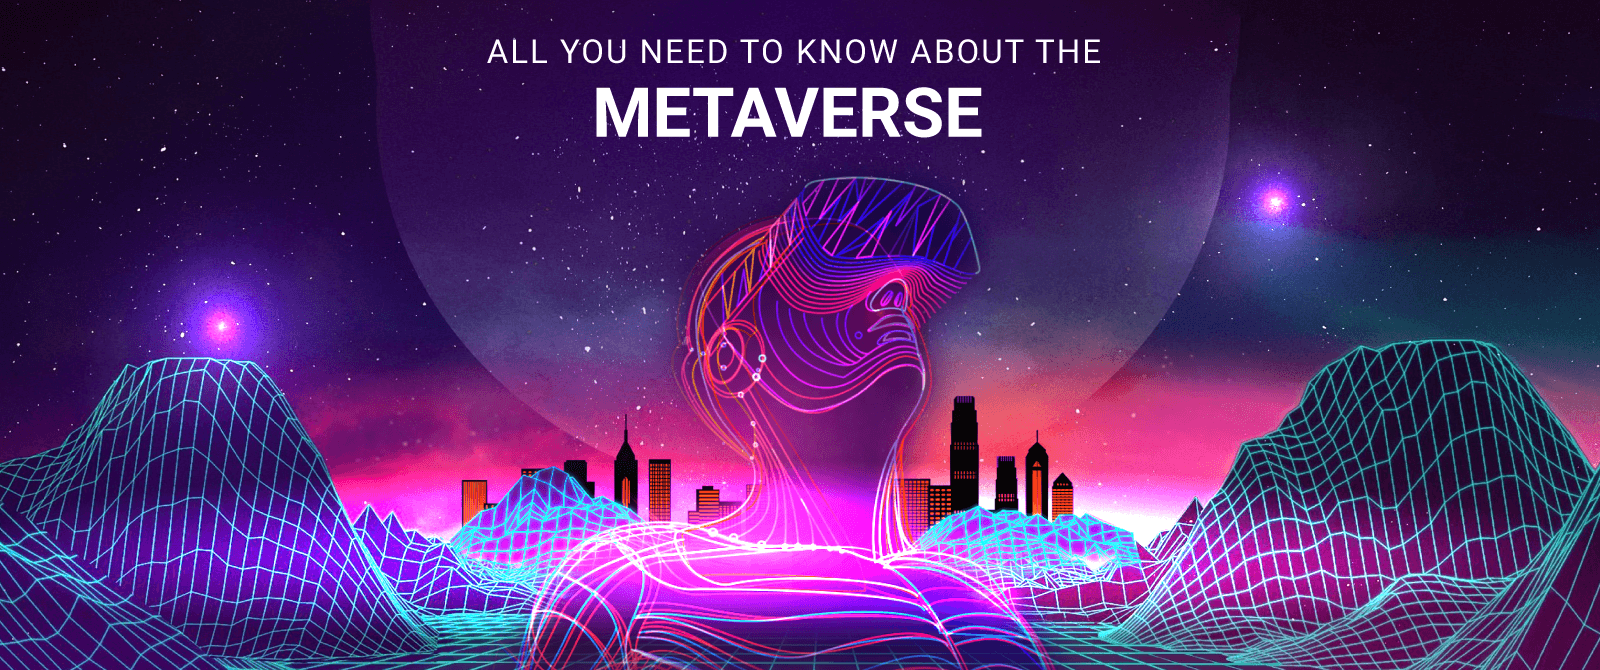 All You Need to Know About the Metaverse